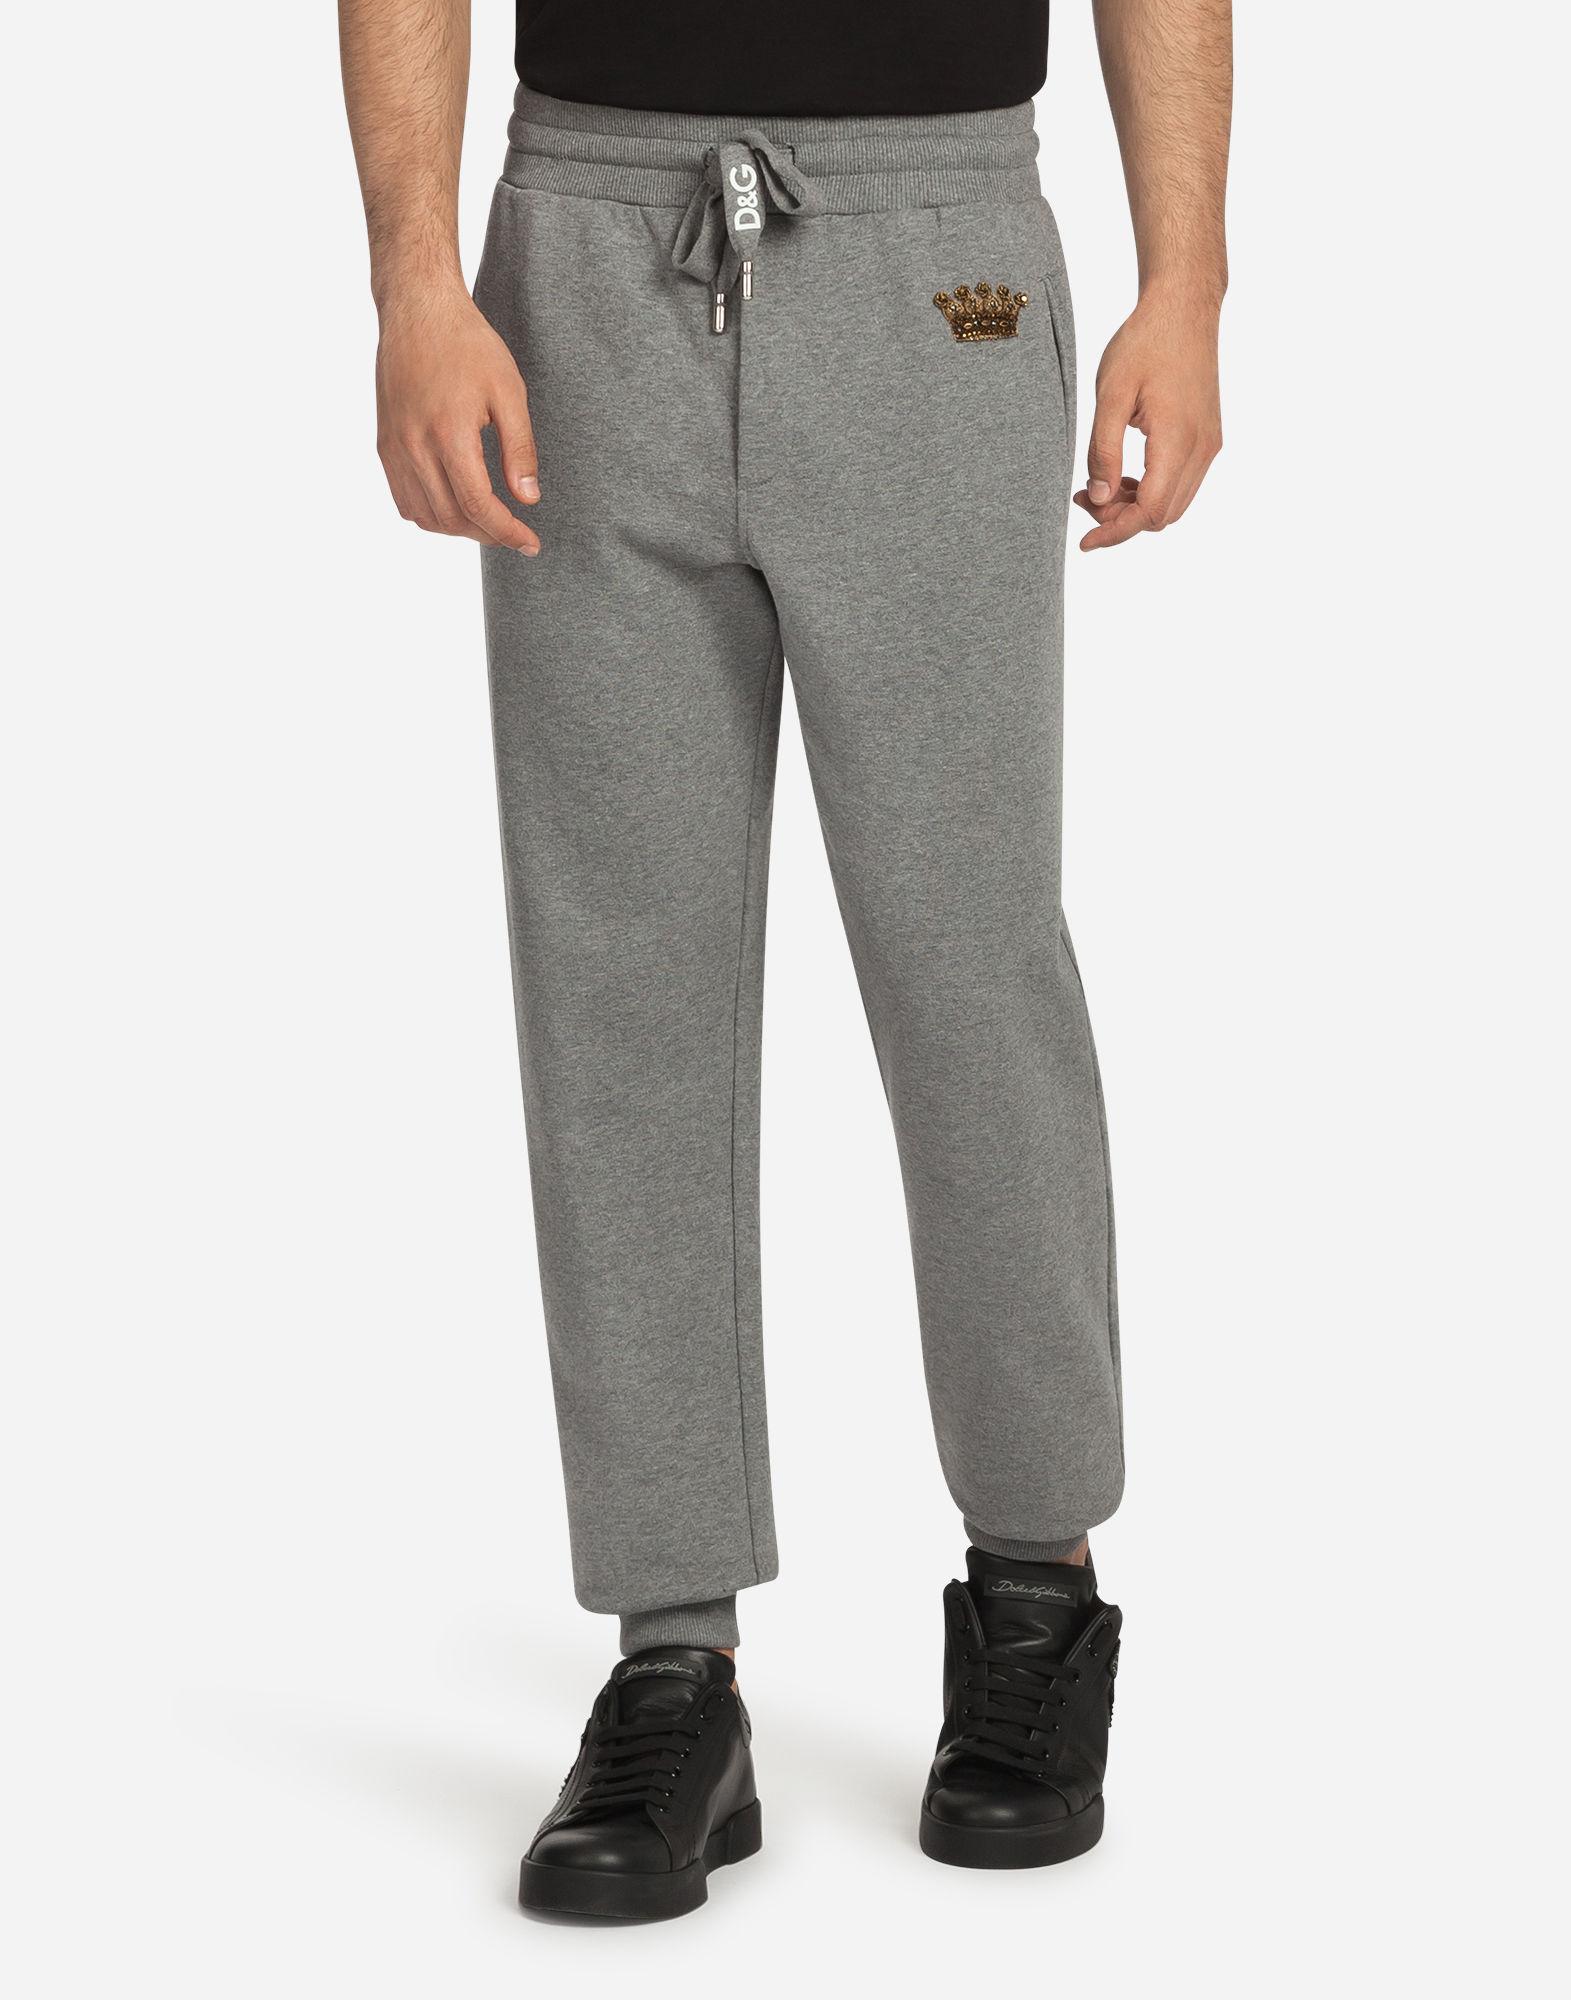 dolce and gabbana jogging suit